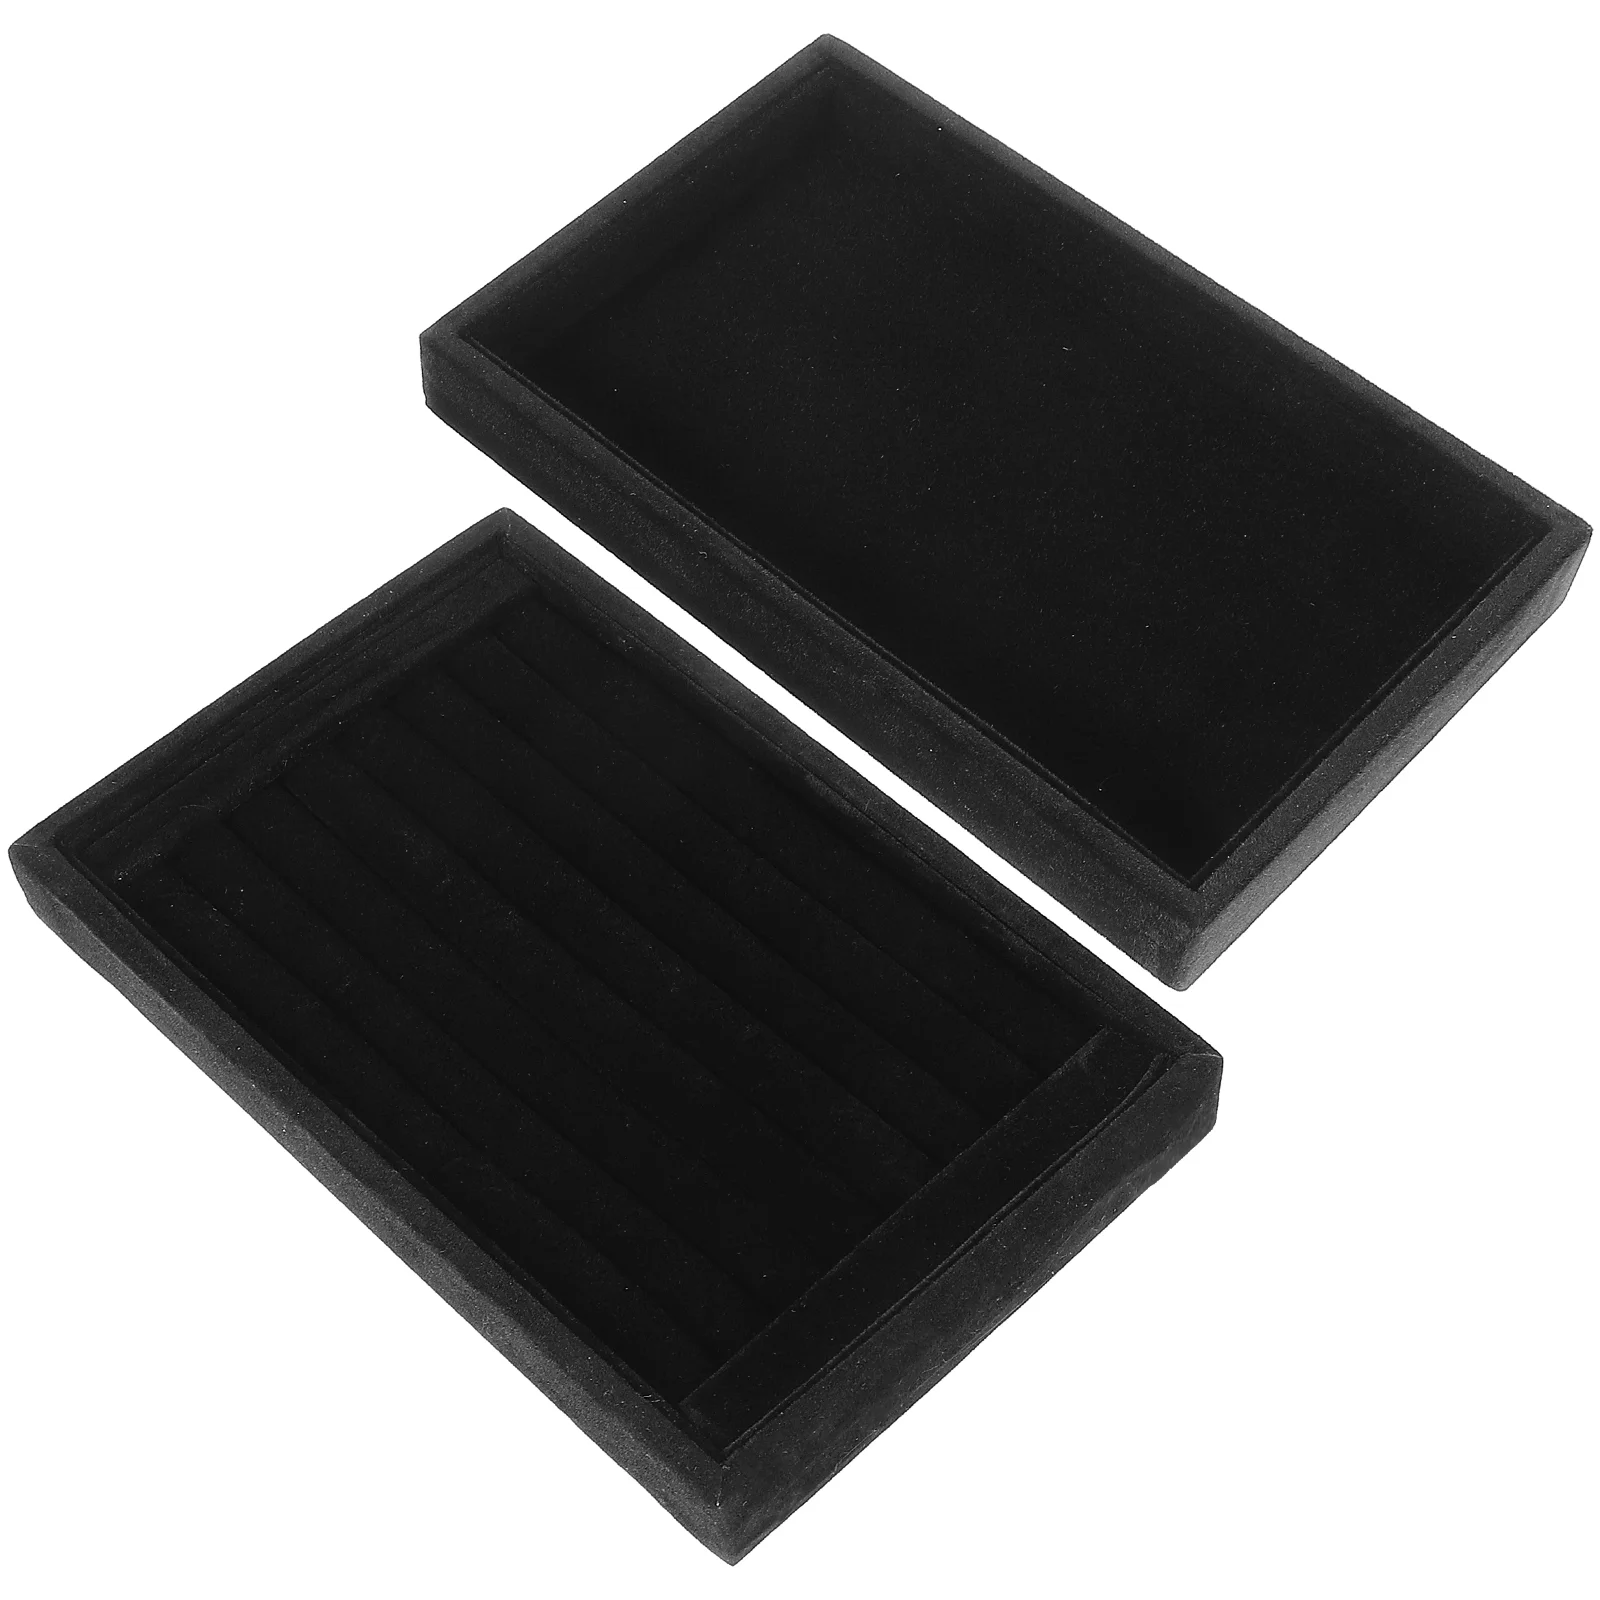 2 Pcs Suede Jewelry Tray Earring Stud Organizer Ornament Storage Box Accessories